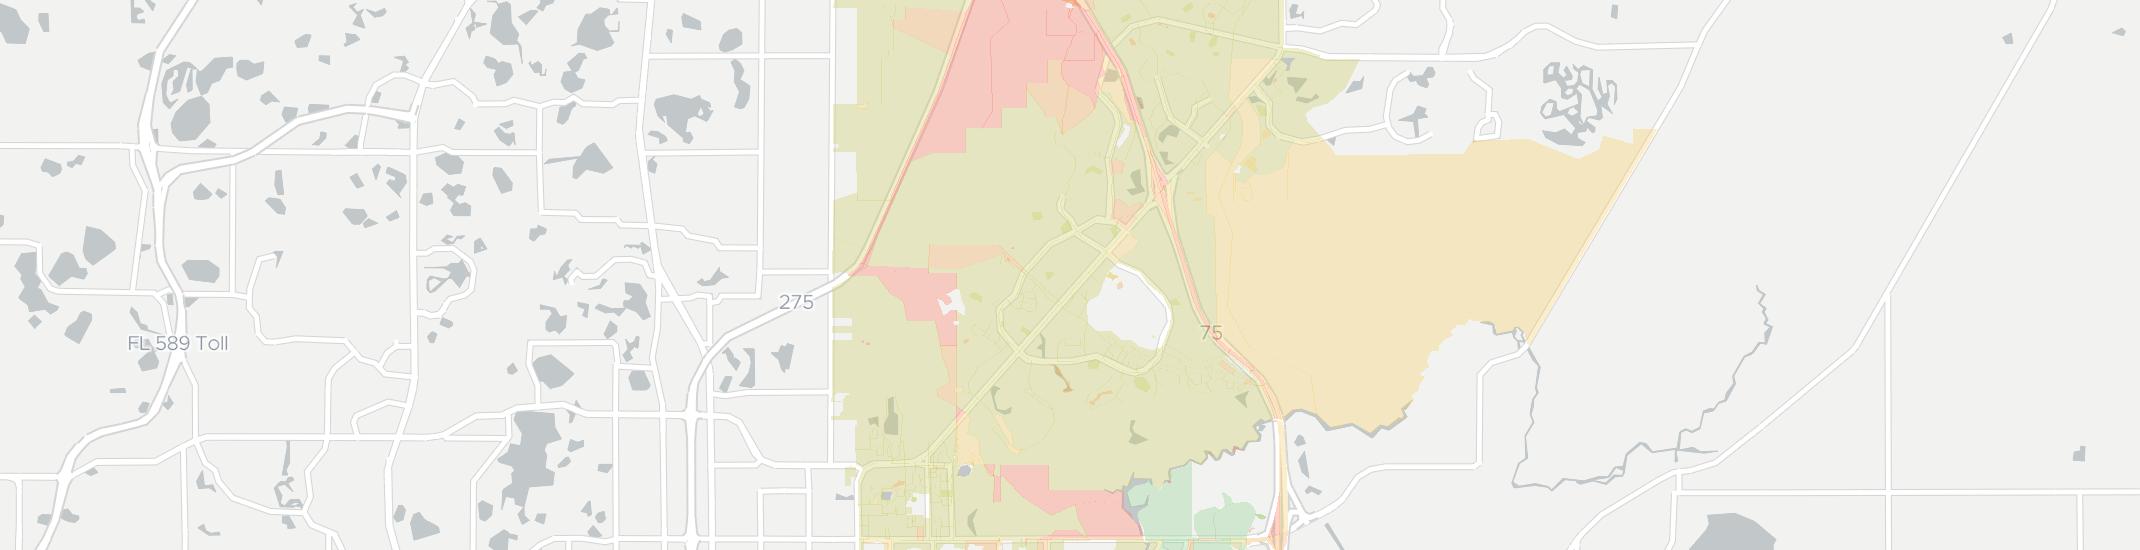 Tampa Palms Internet Competition Map. Click for interactive map.